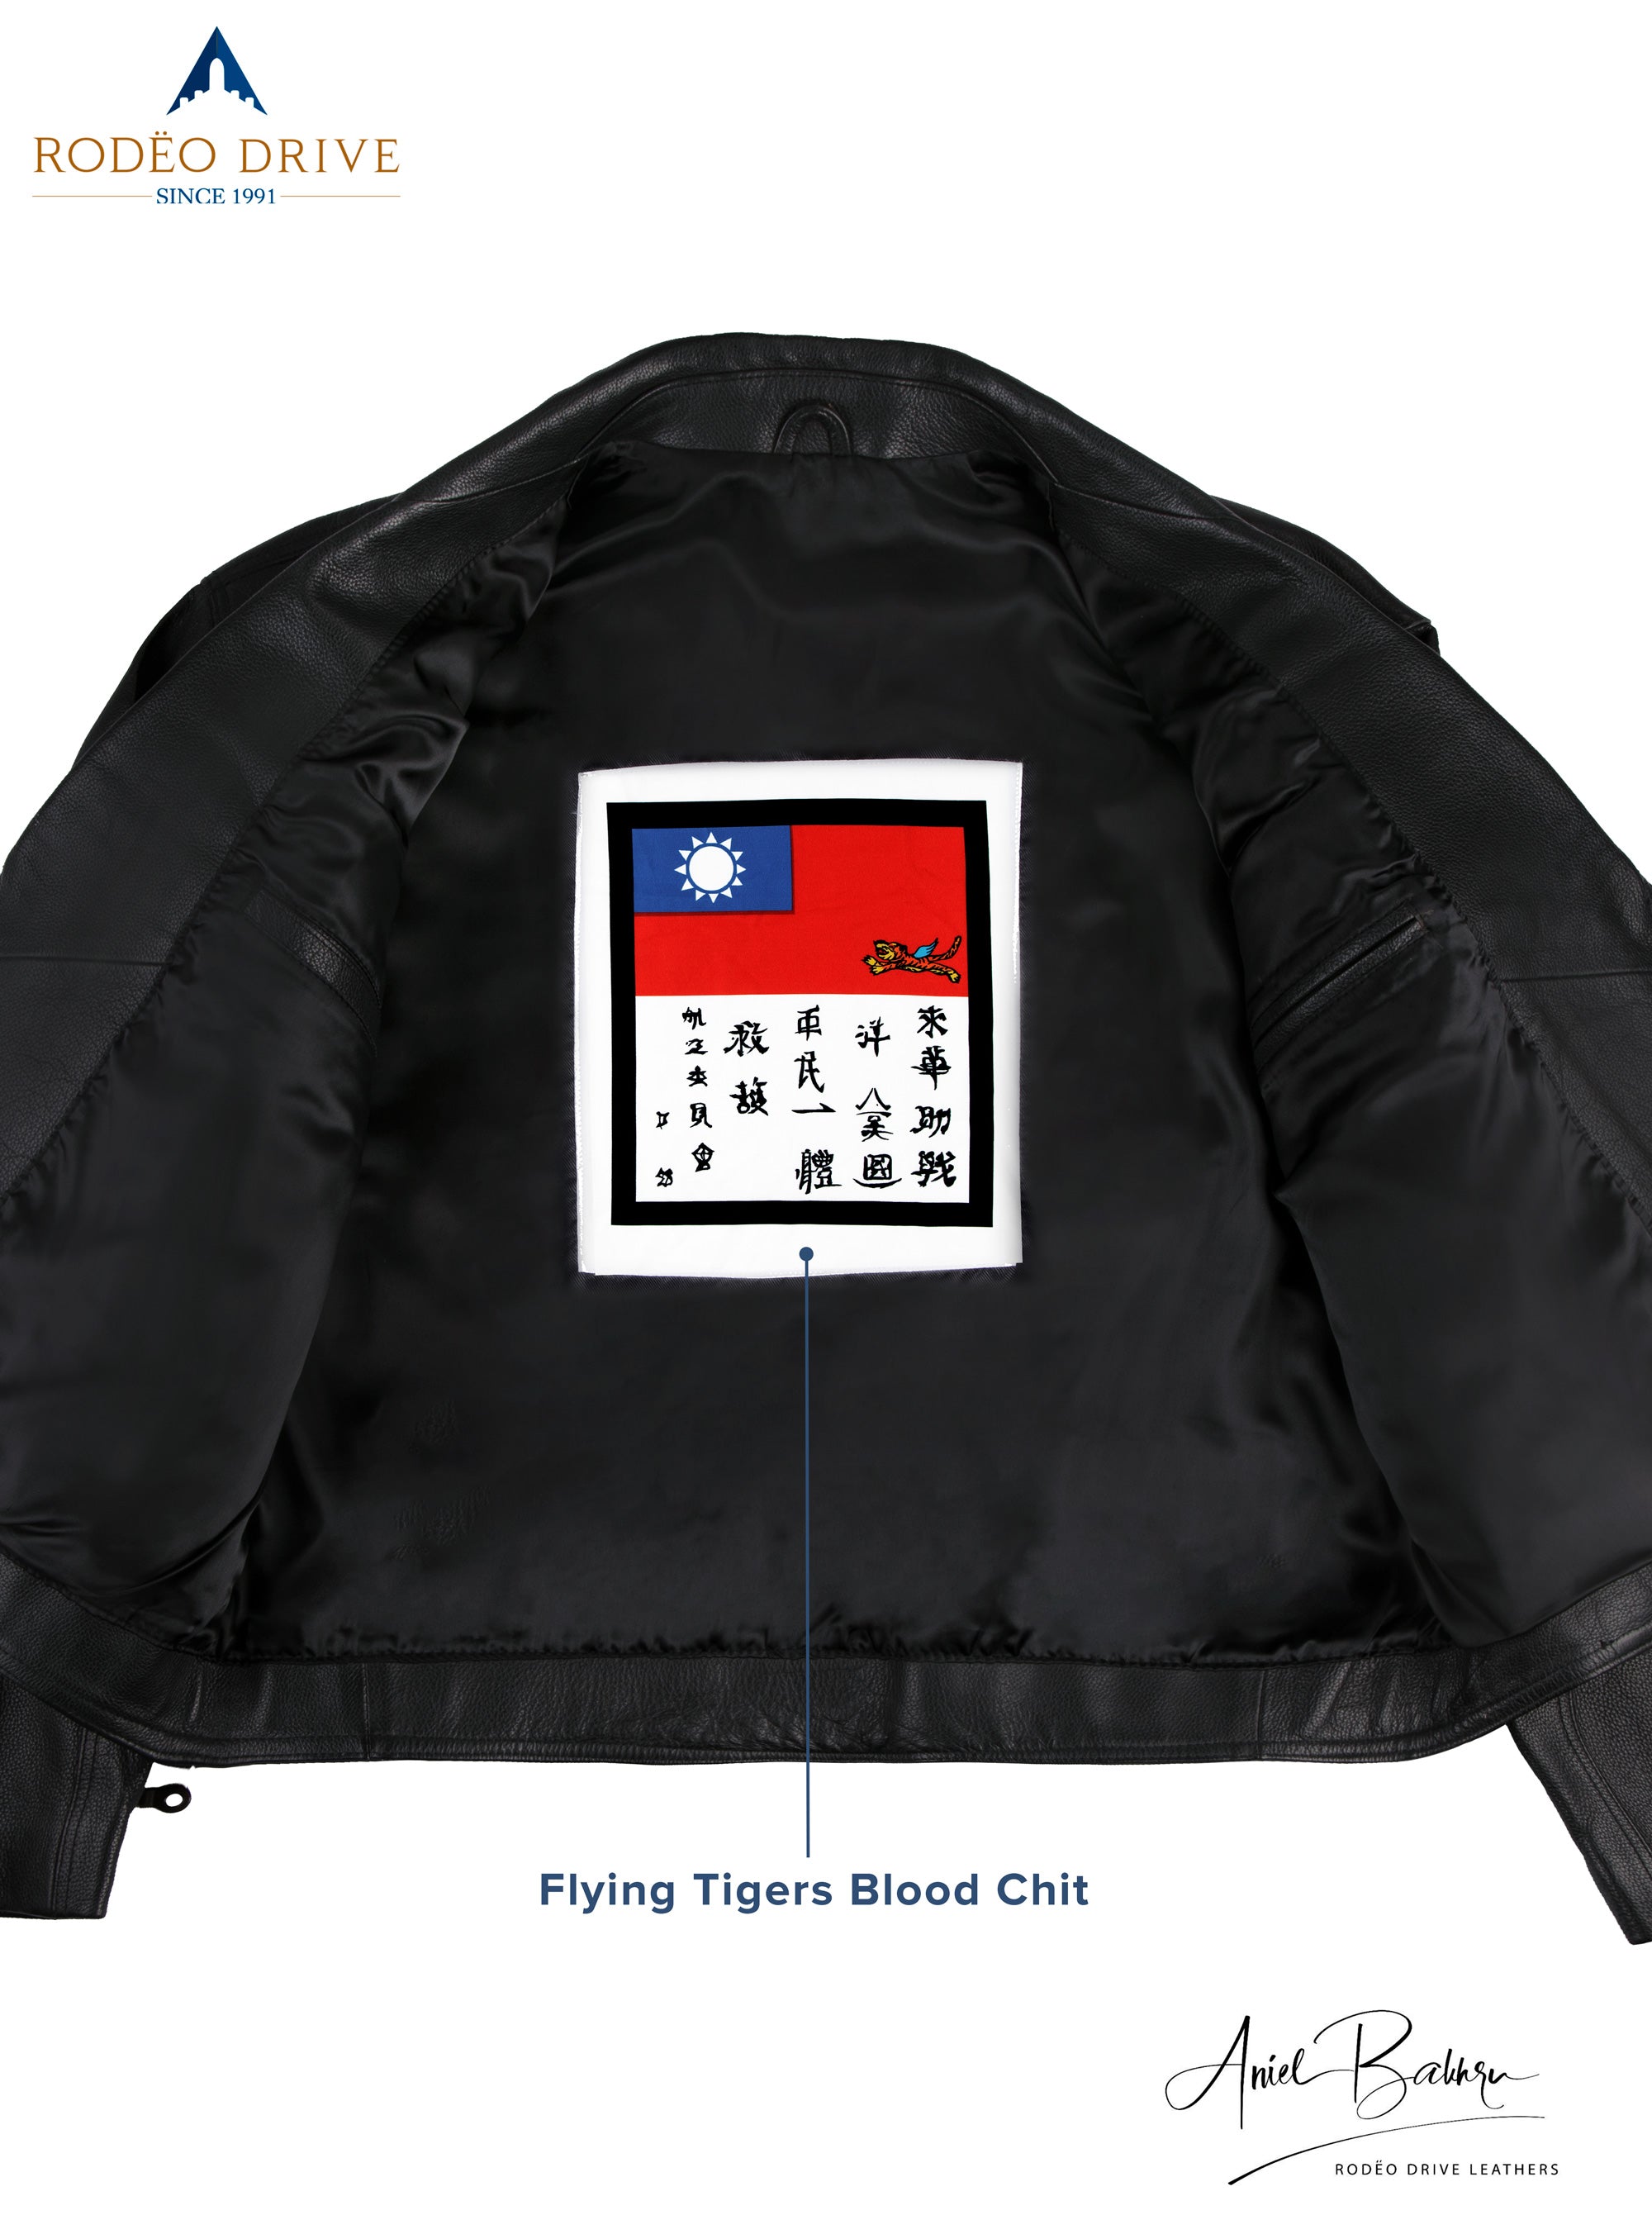 Inside image of open HARLEY JACKET. Flying Tigers blood chit is sewed inside the jacket.